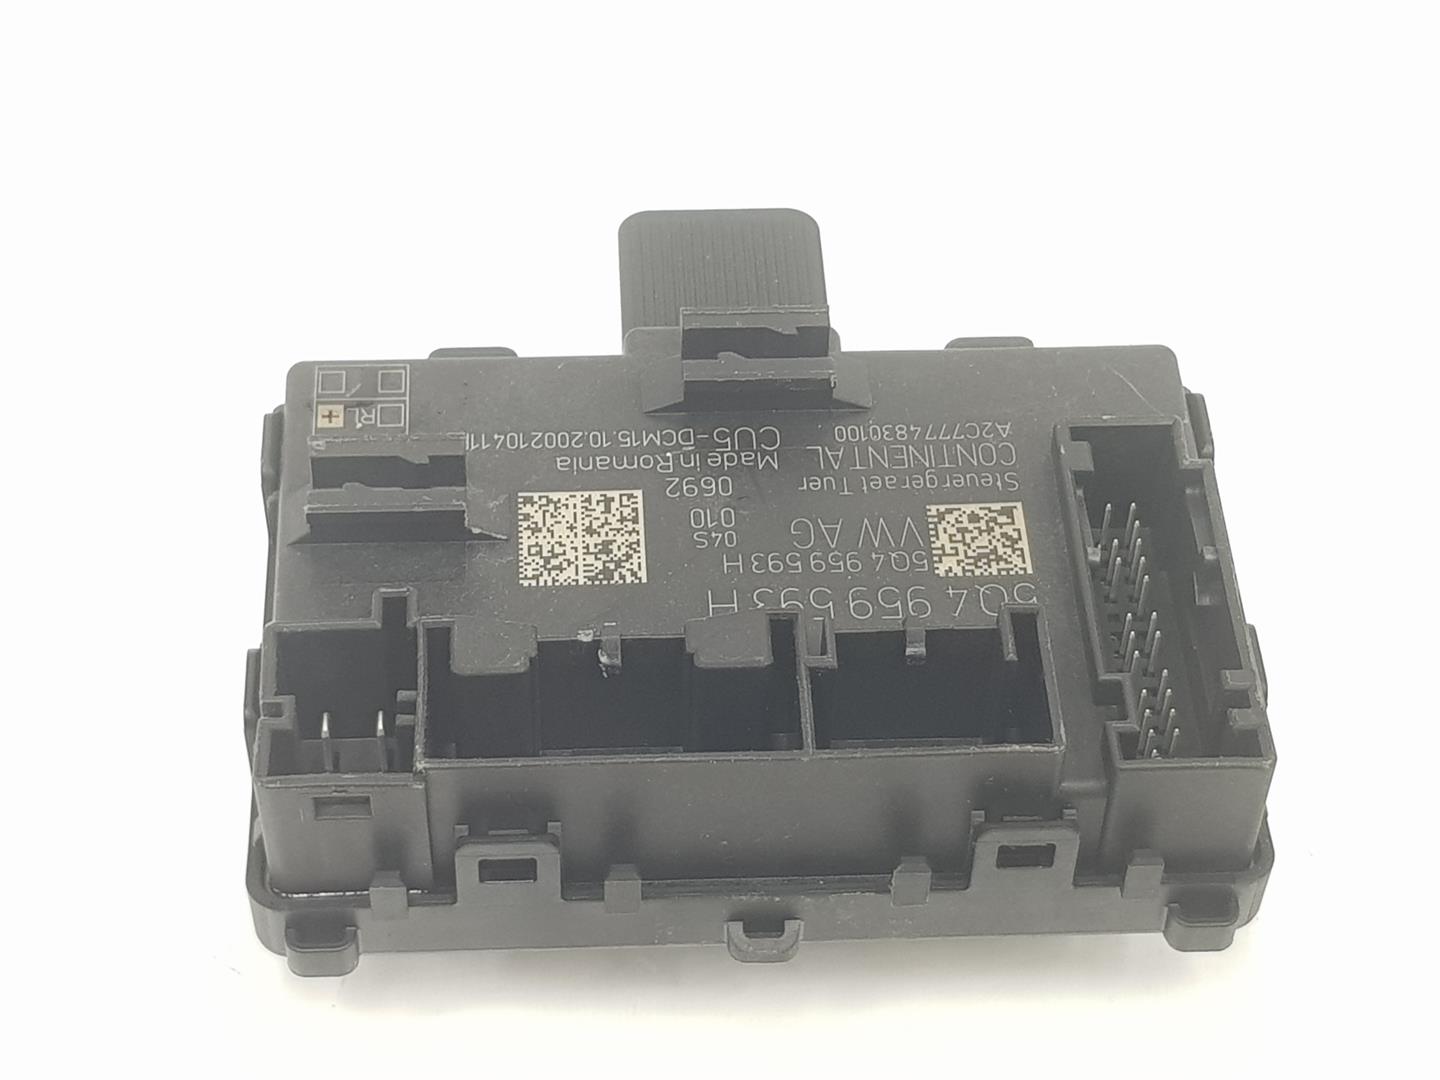 SEAT Alhambra 2 generation (2010-2021) Other Control Units A2C7774830100, 5Q4959593H 23752812